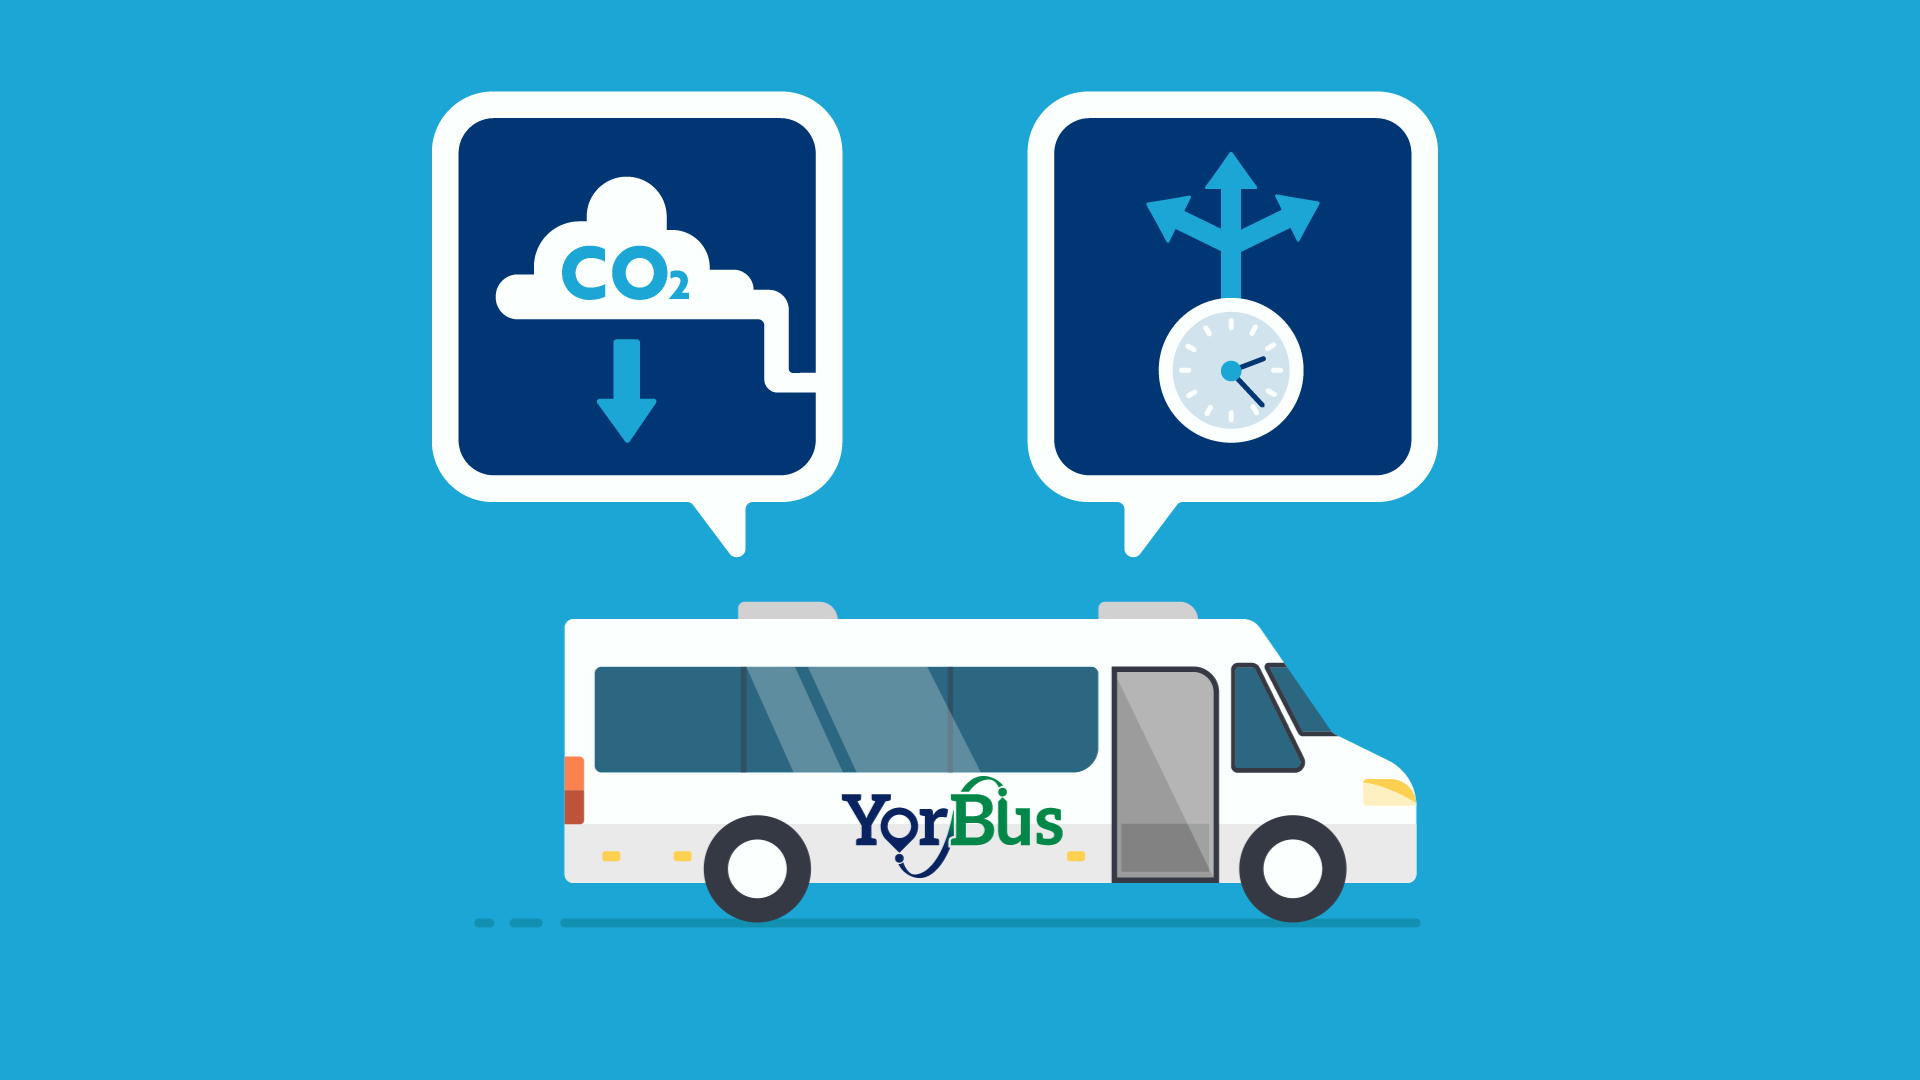 an image from the animation showing a YorBus bus and indicating the services' eco credentials and flexibility